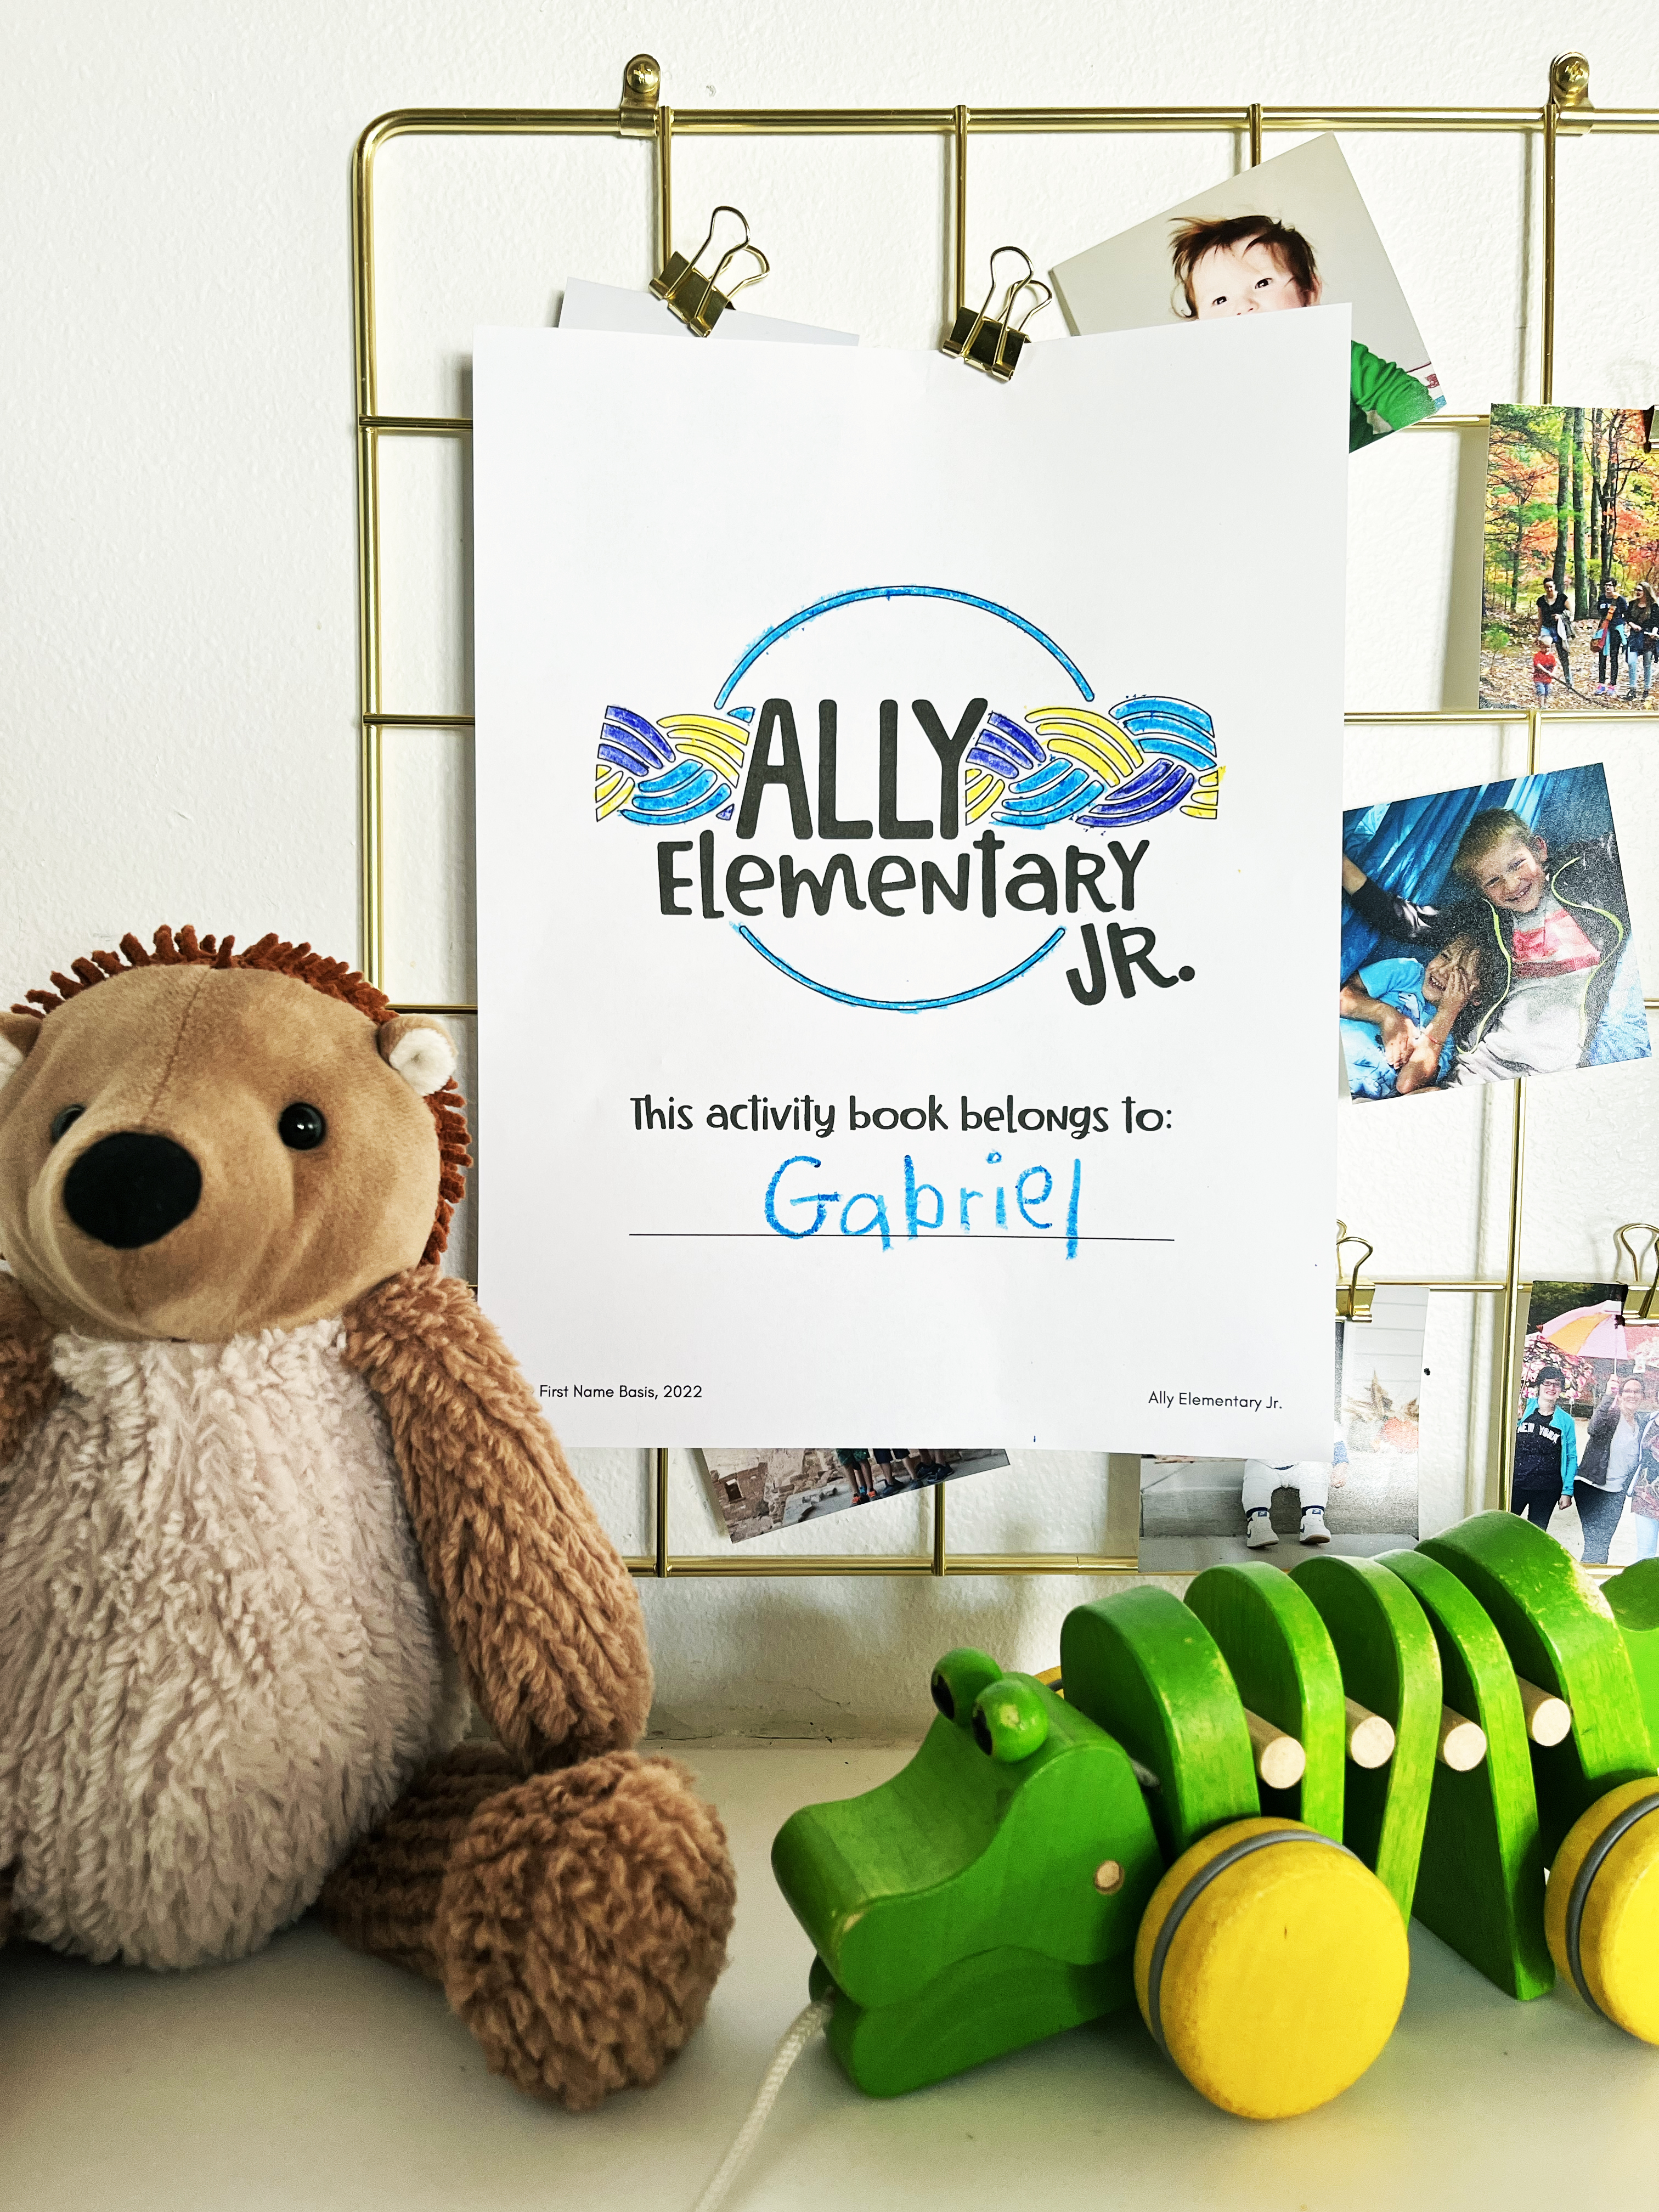 This photo shows the cover of the Ally Elementary Jr. workbook, surrounded by toys and family photos.